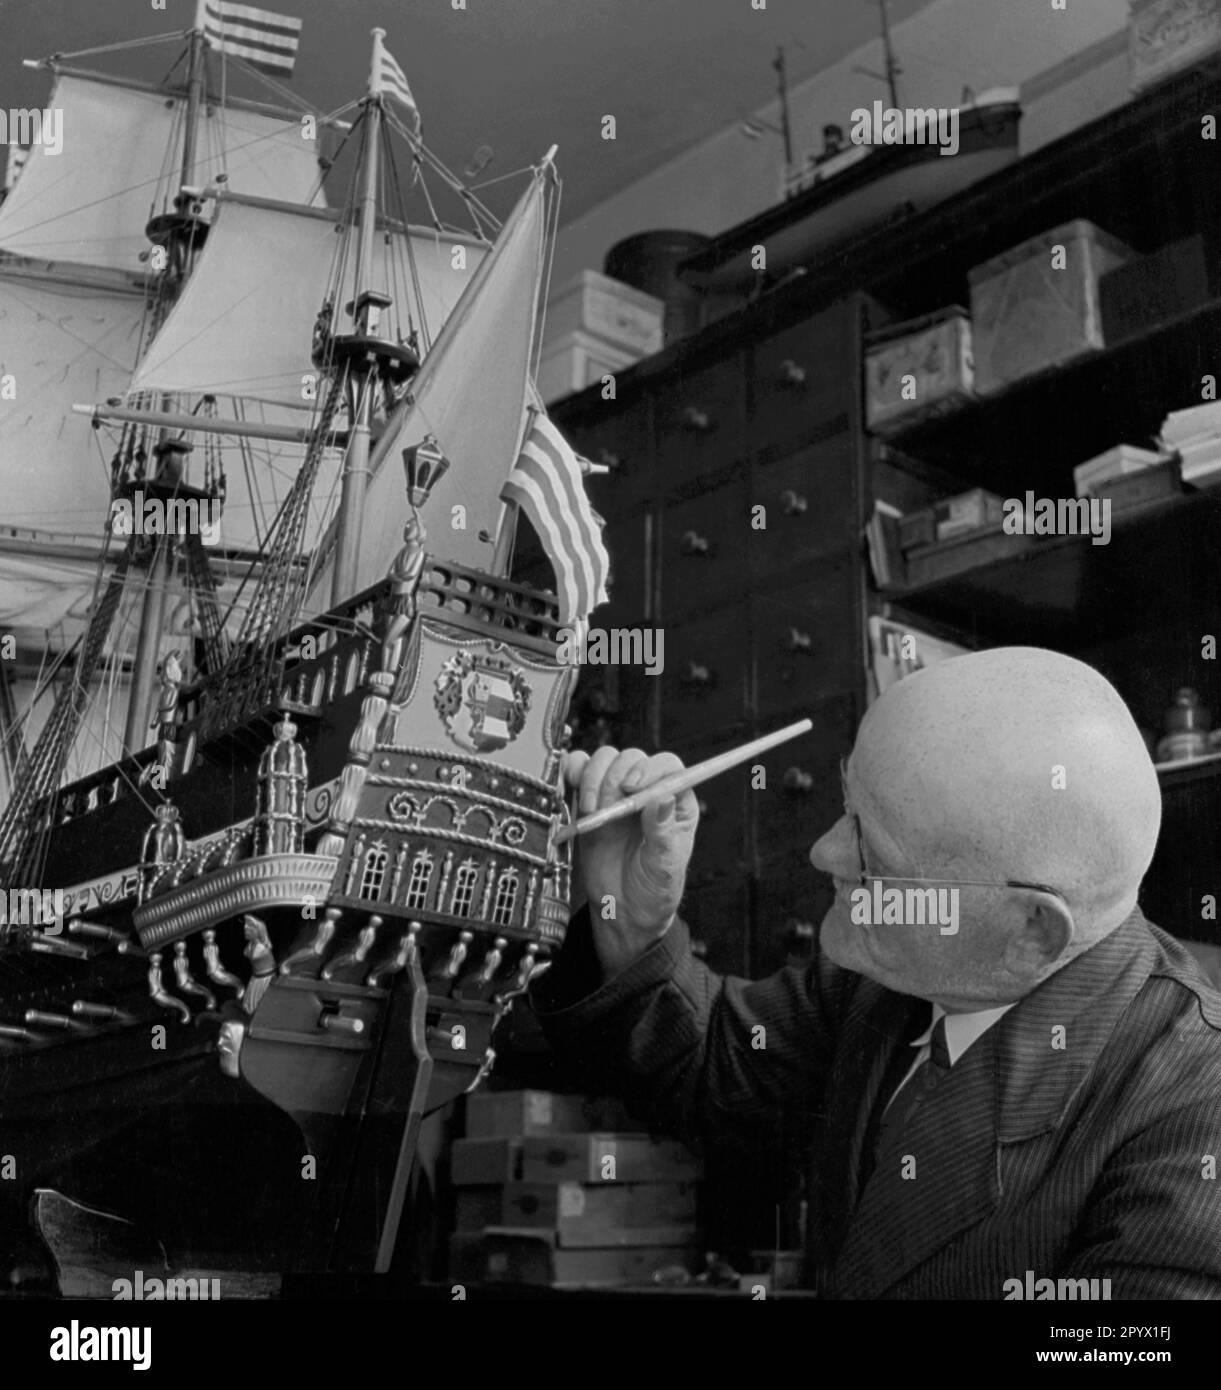 The model maker Robert Daehncke working on one of his ship models. Stock Photo